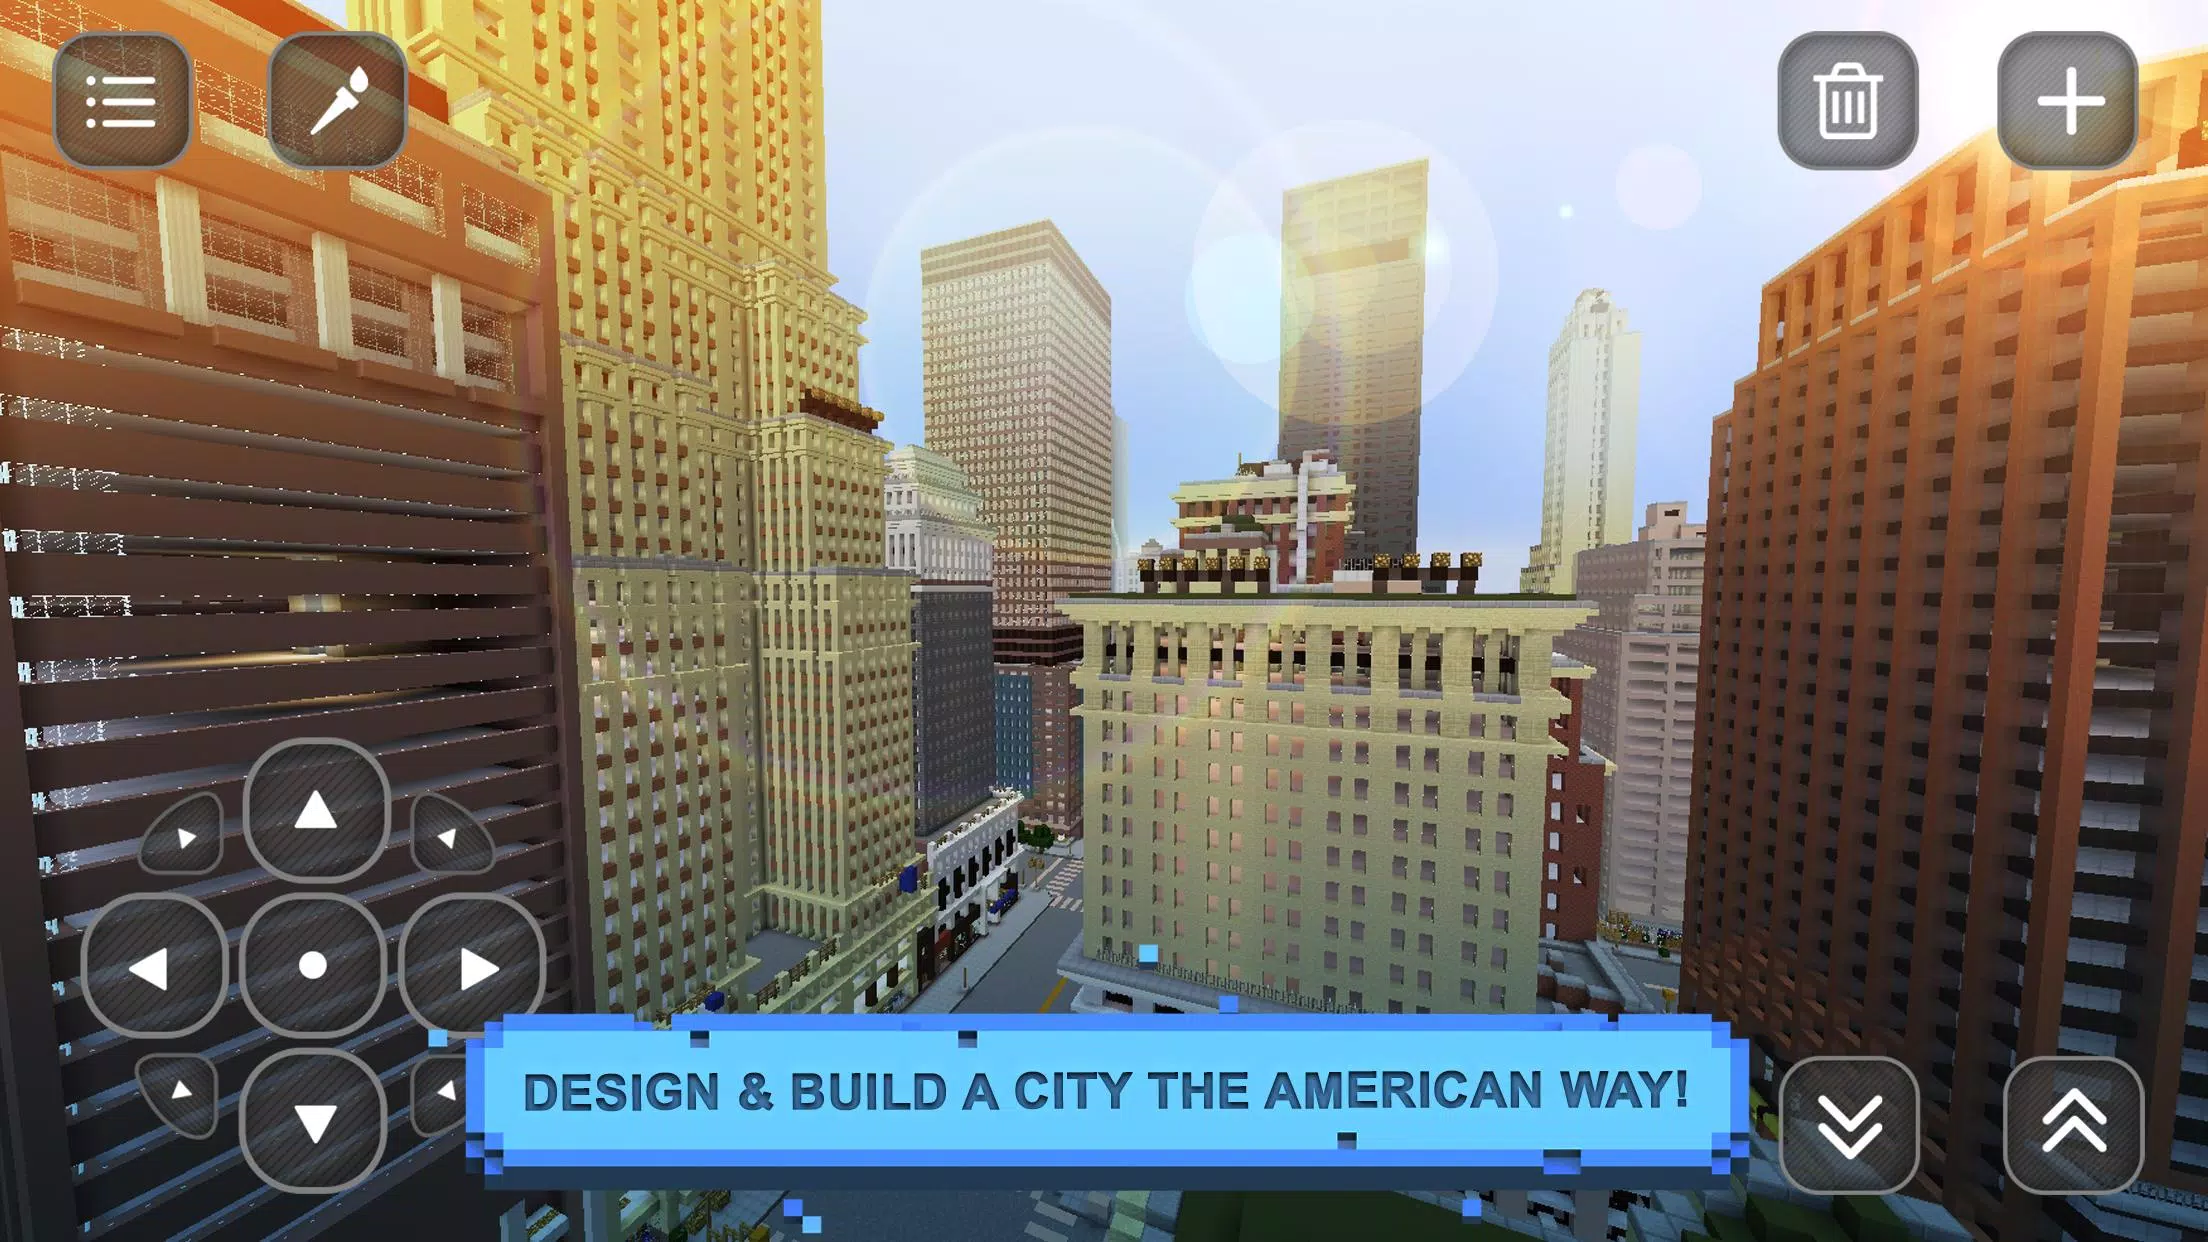 USA Block Craft Exploration 3D Apk Download for Android- Latest